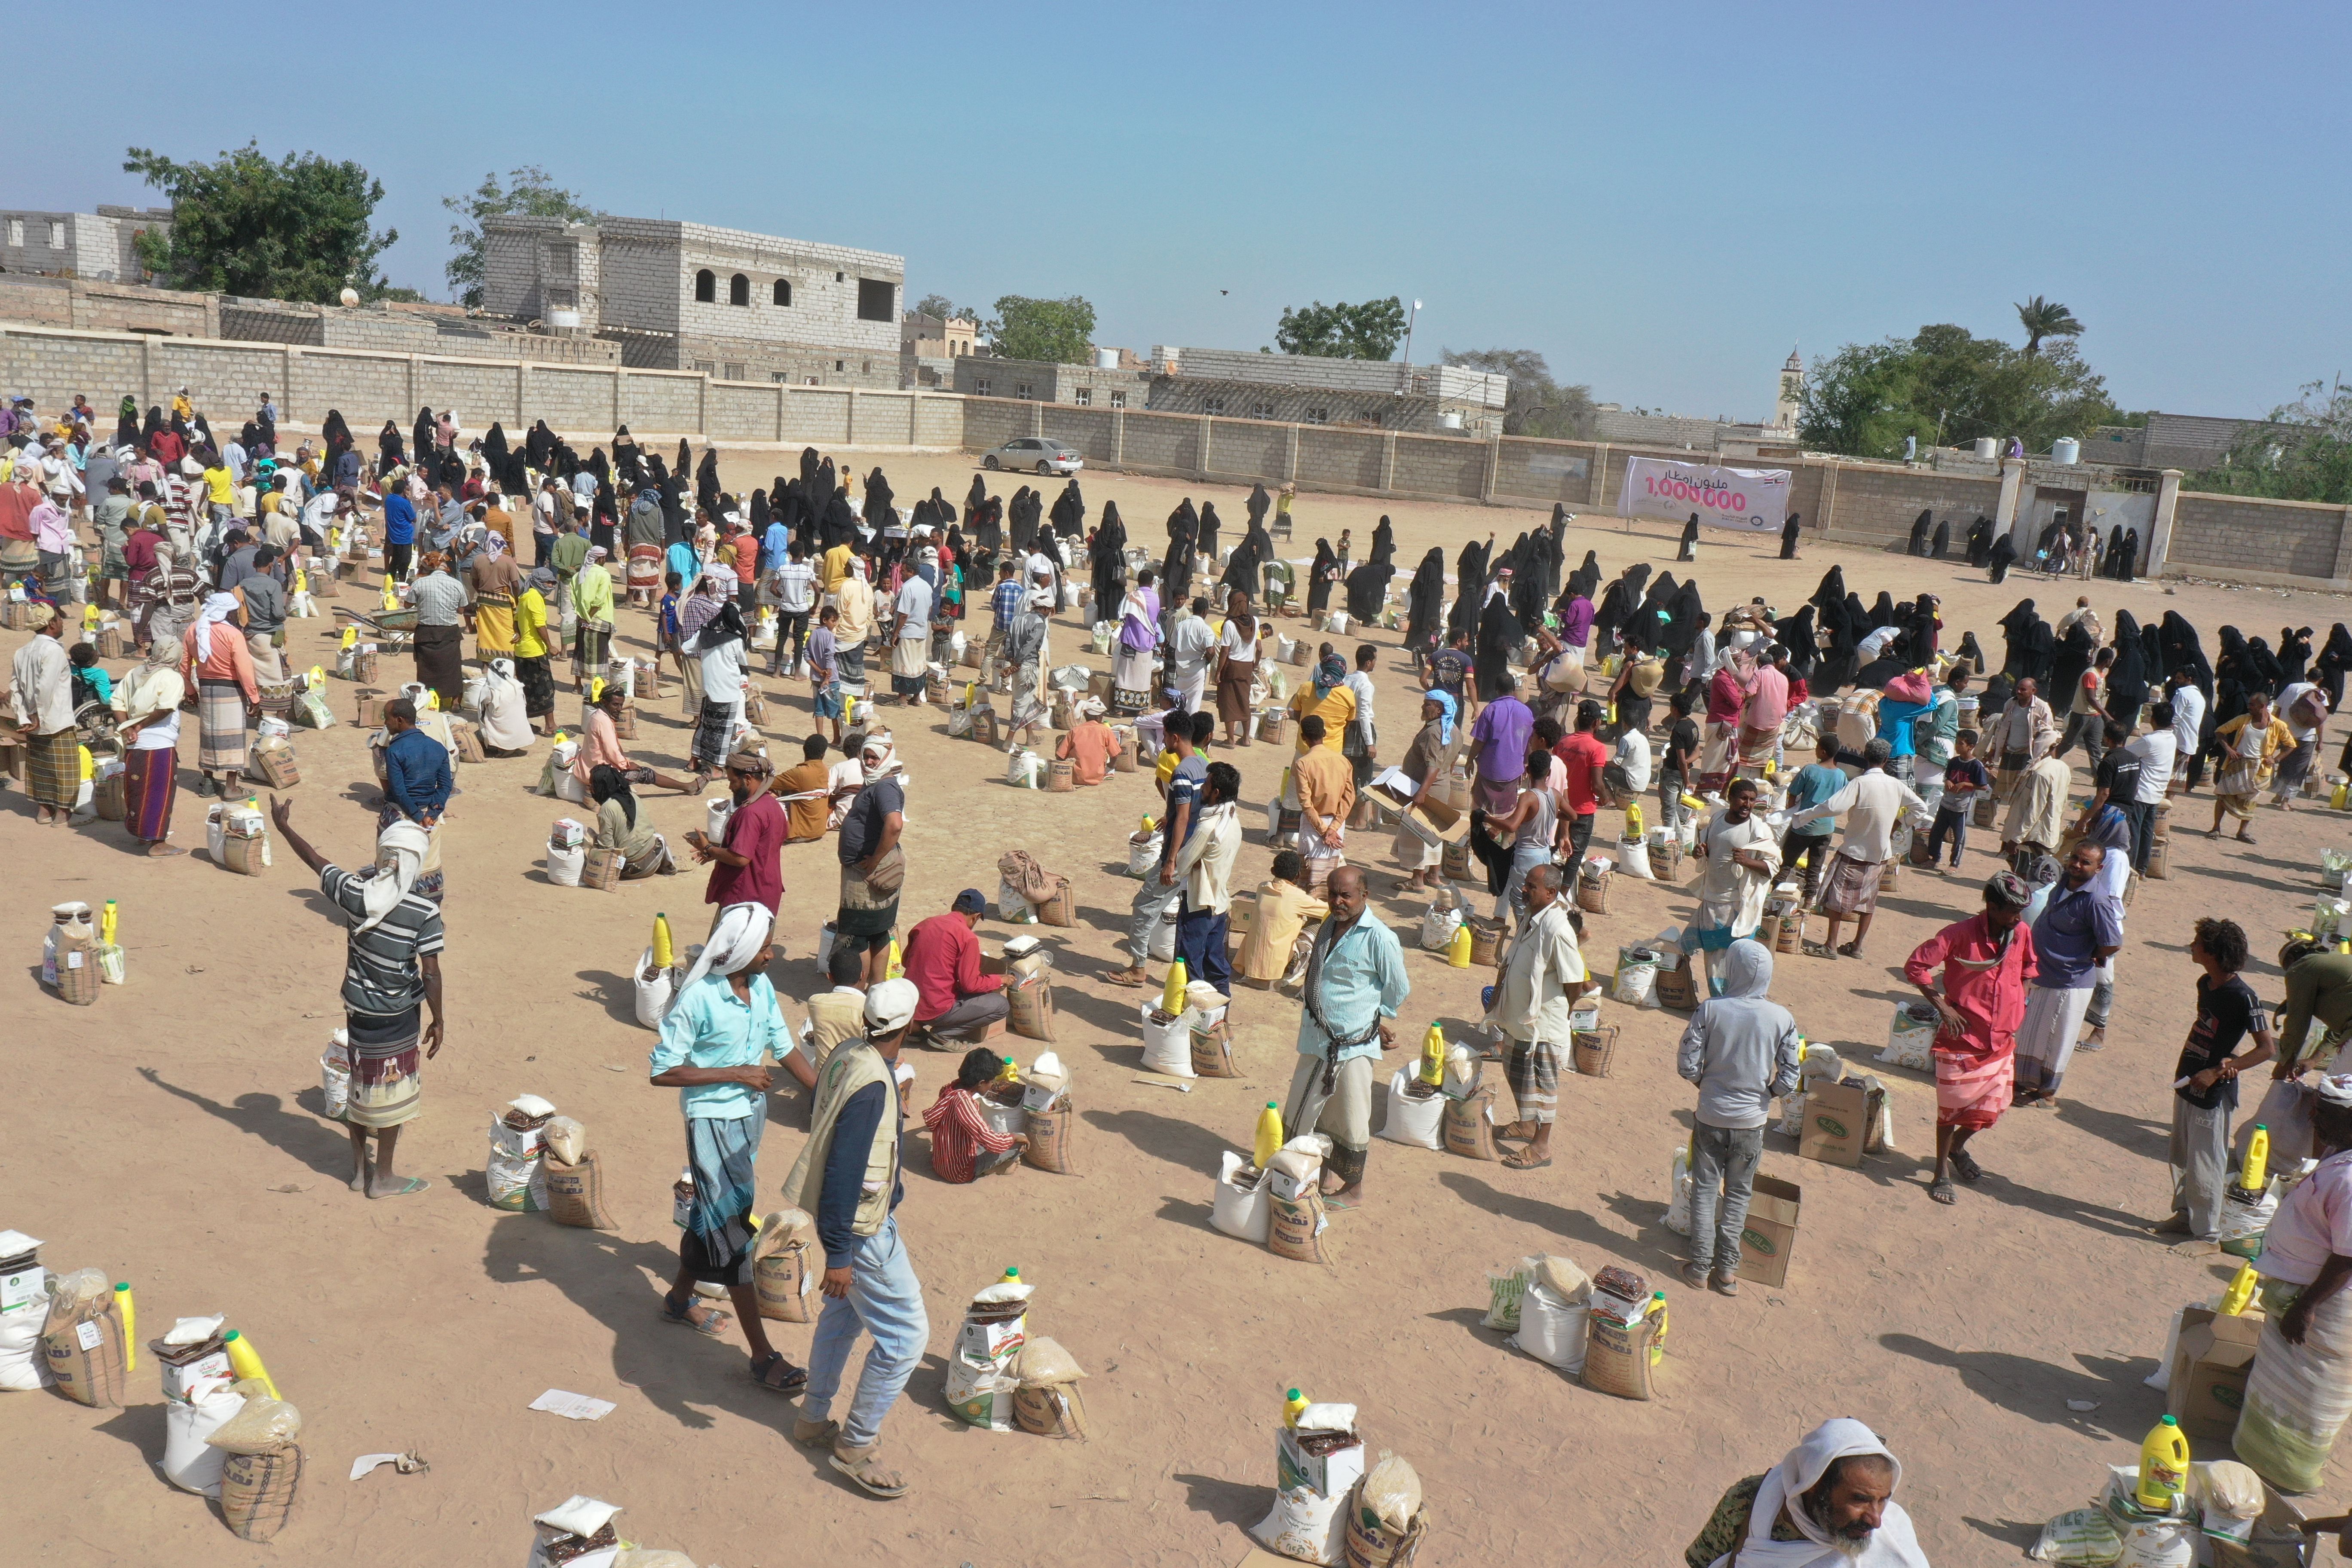 The charity handed out 16,000 food baskets as part of one million Ifatr meals for the poorest families